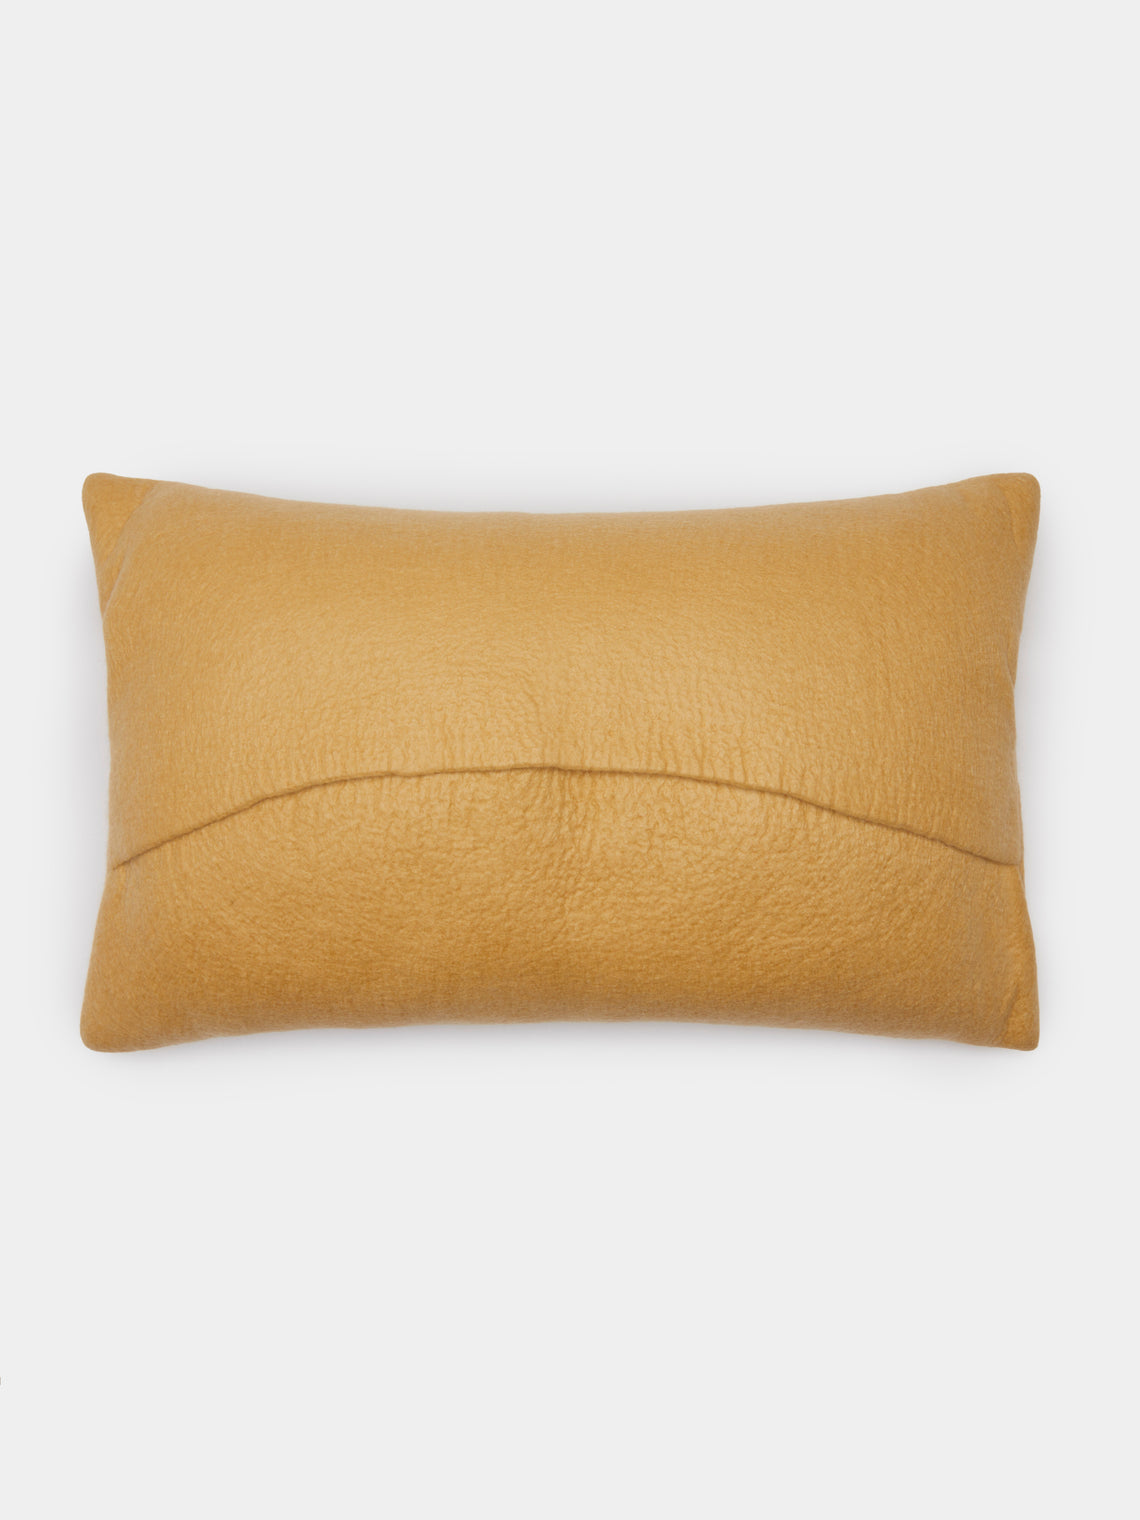 Rose Uniacke - Hand-Dyed Felted Cashmere Small Cushion - Gold - ABASK